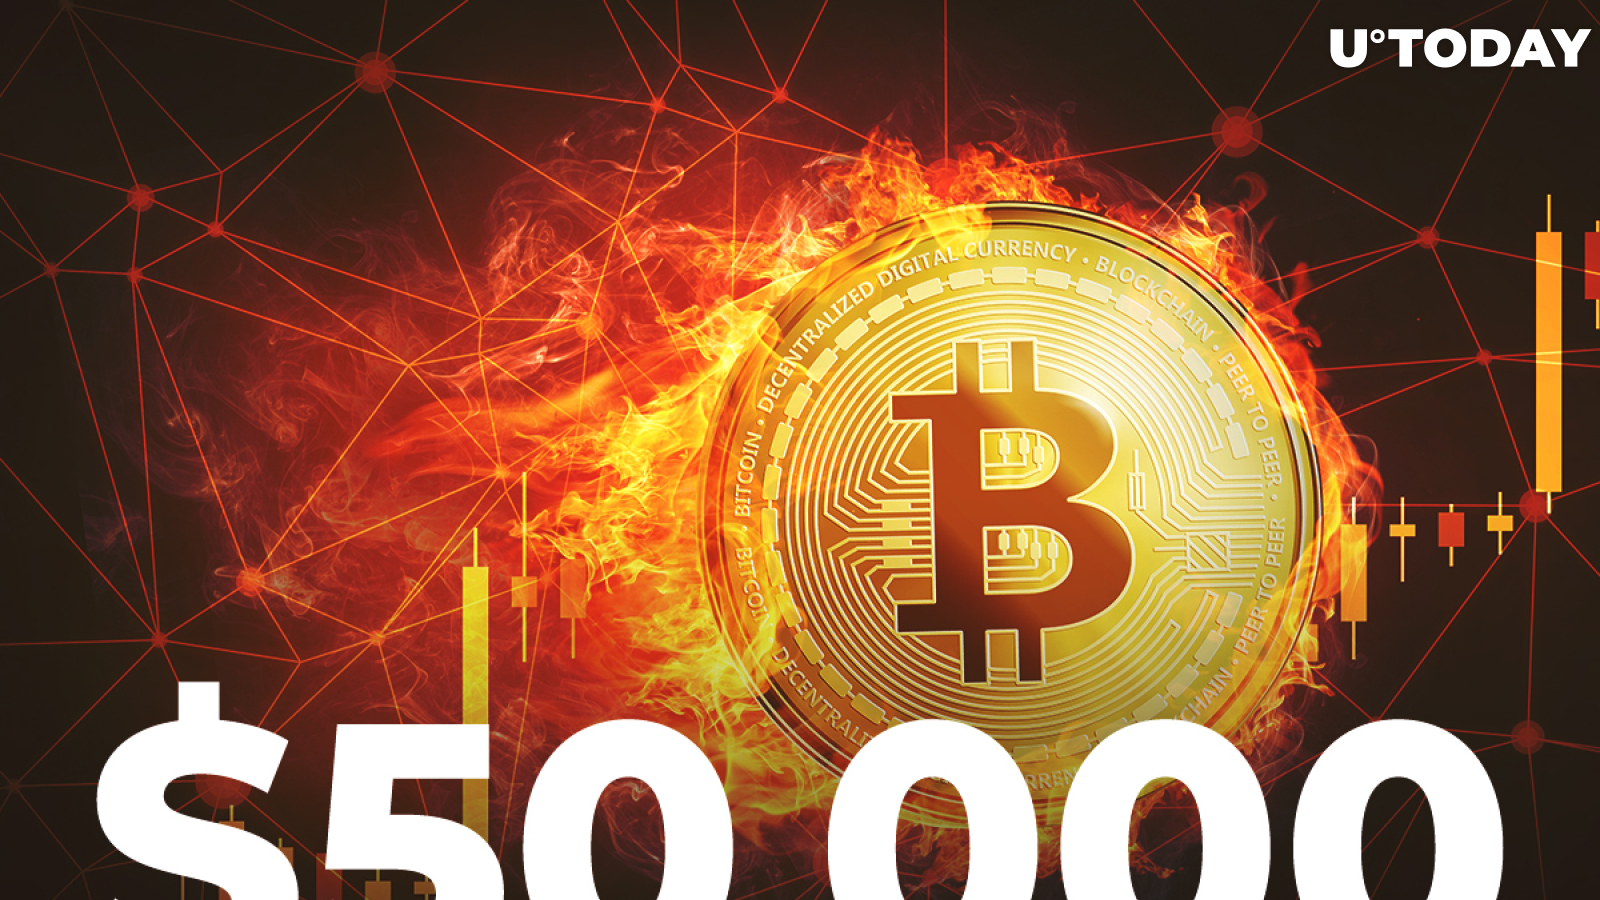 Bitcoin Recaptures $50,000 After Declining for Over Week